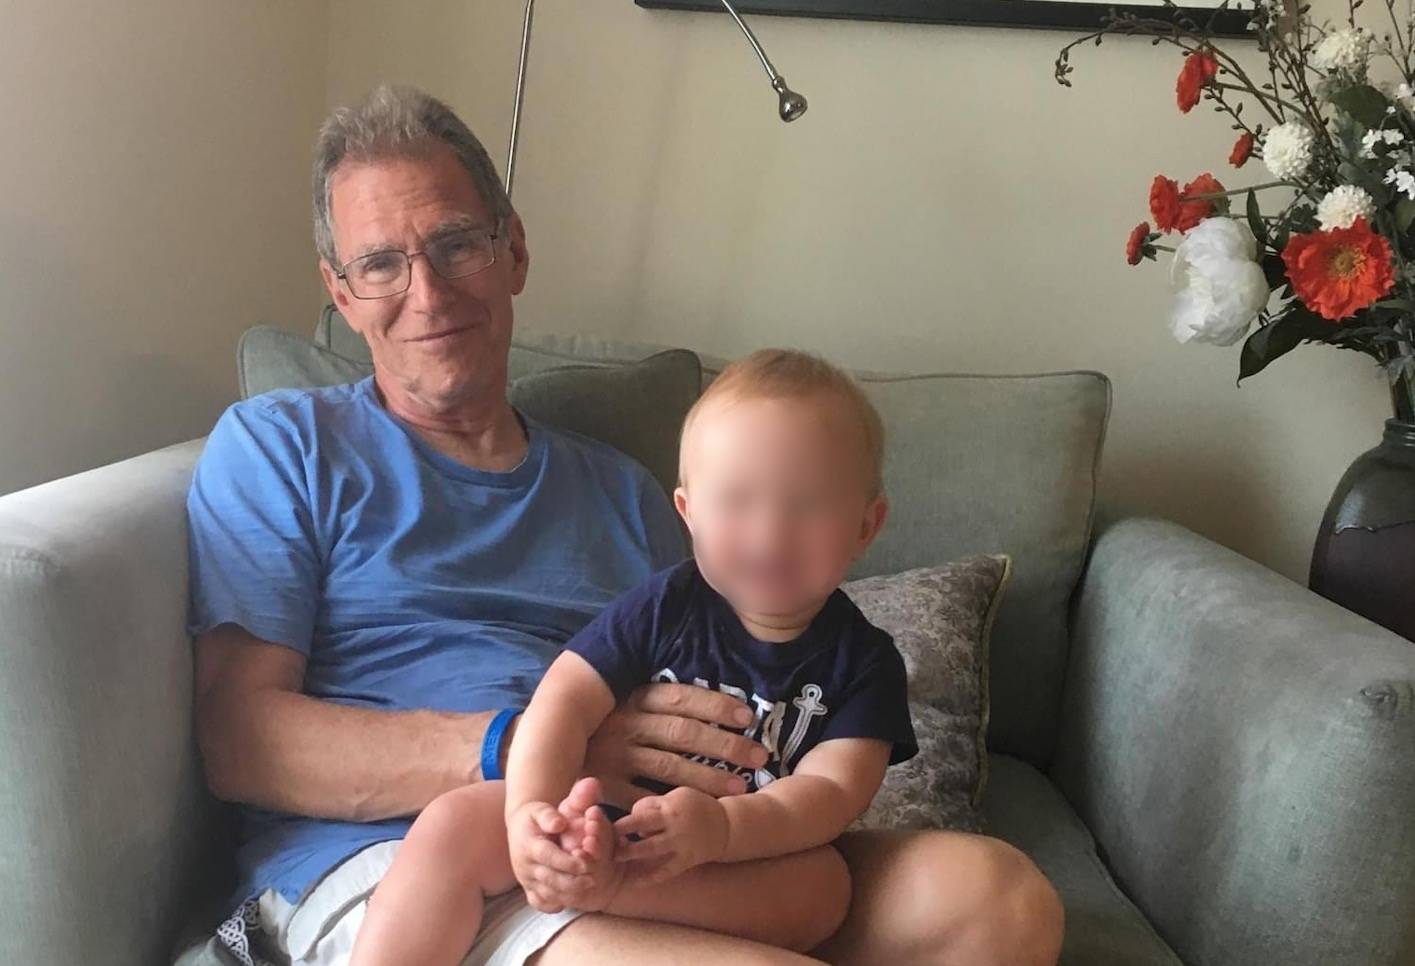 Authorities are searching for 70-year-old David Leek who went missing in Federal Way on June 4. The child’s face in this photo has been blurred for privacy. Courtesy photo